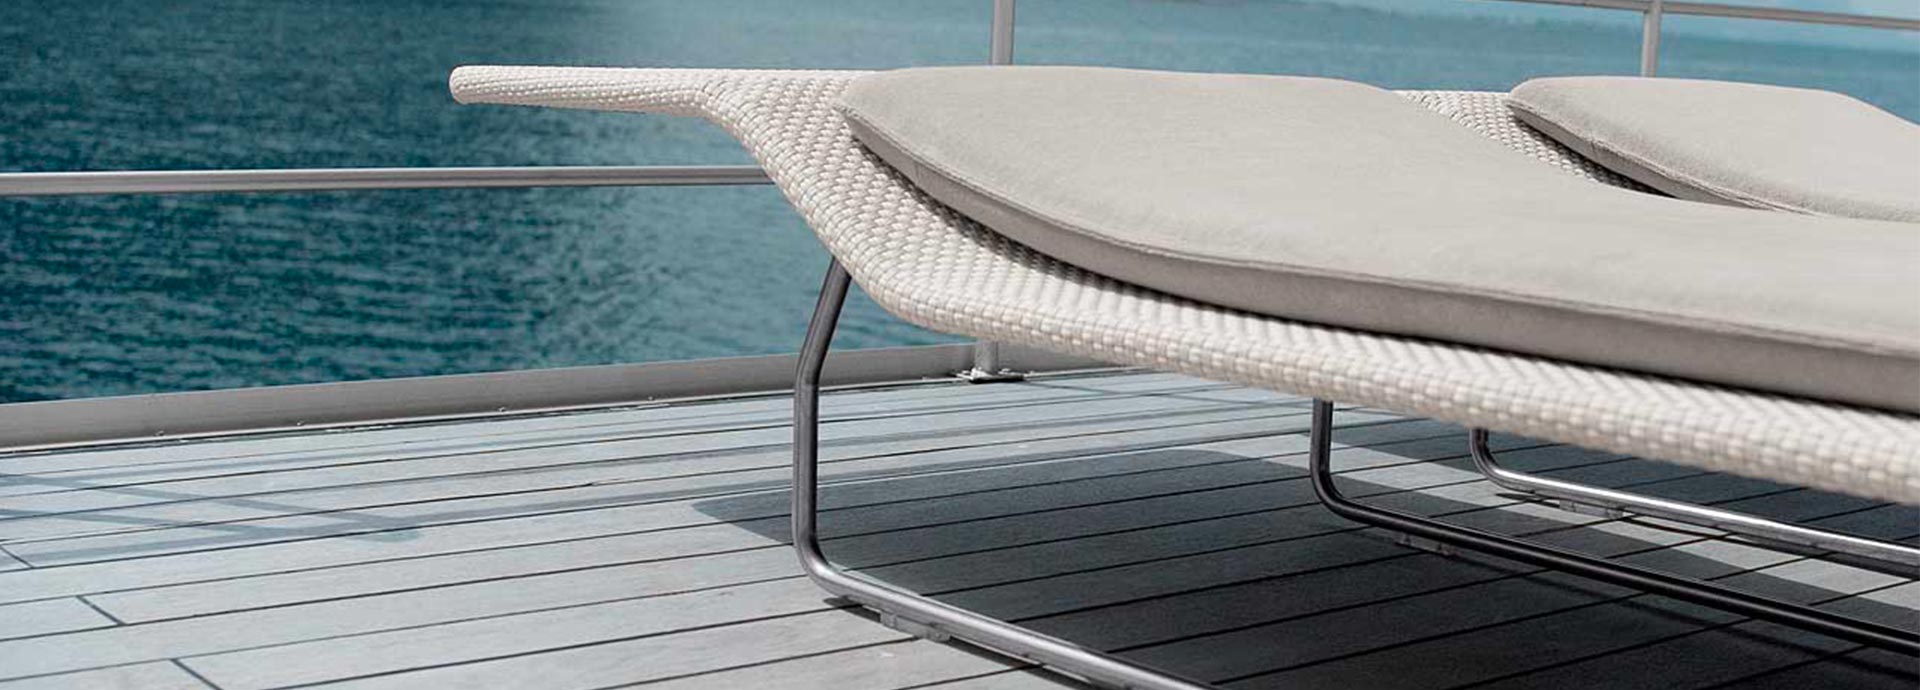 Surf Paola Lenti collection